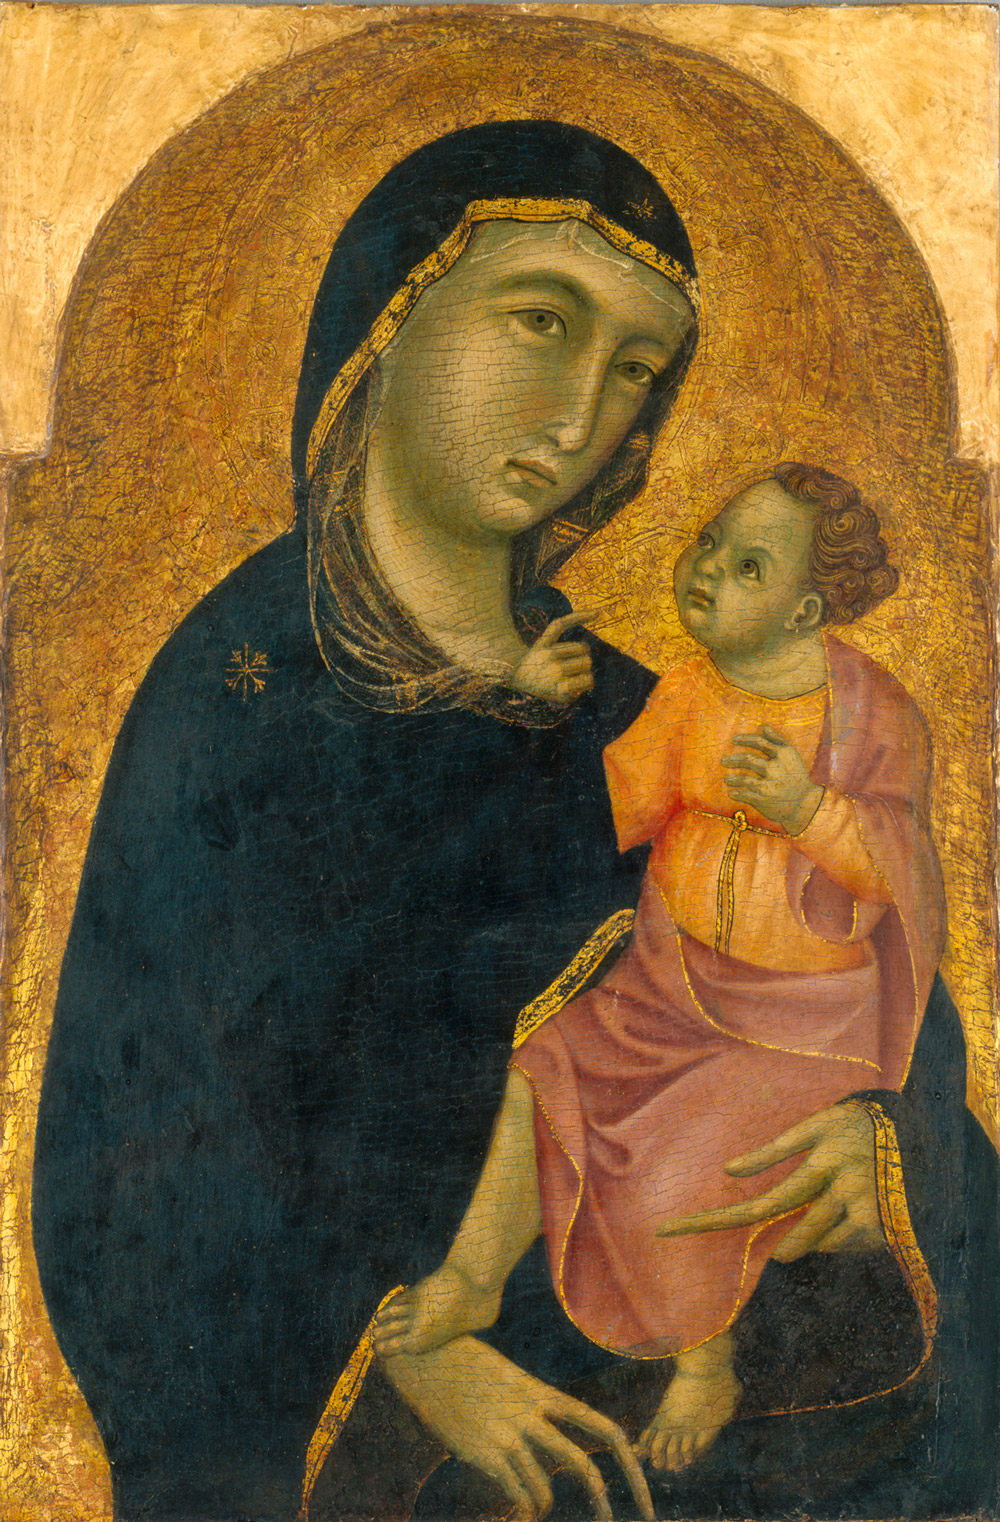 Object of the Week: Virgin and Child